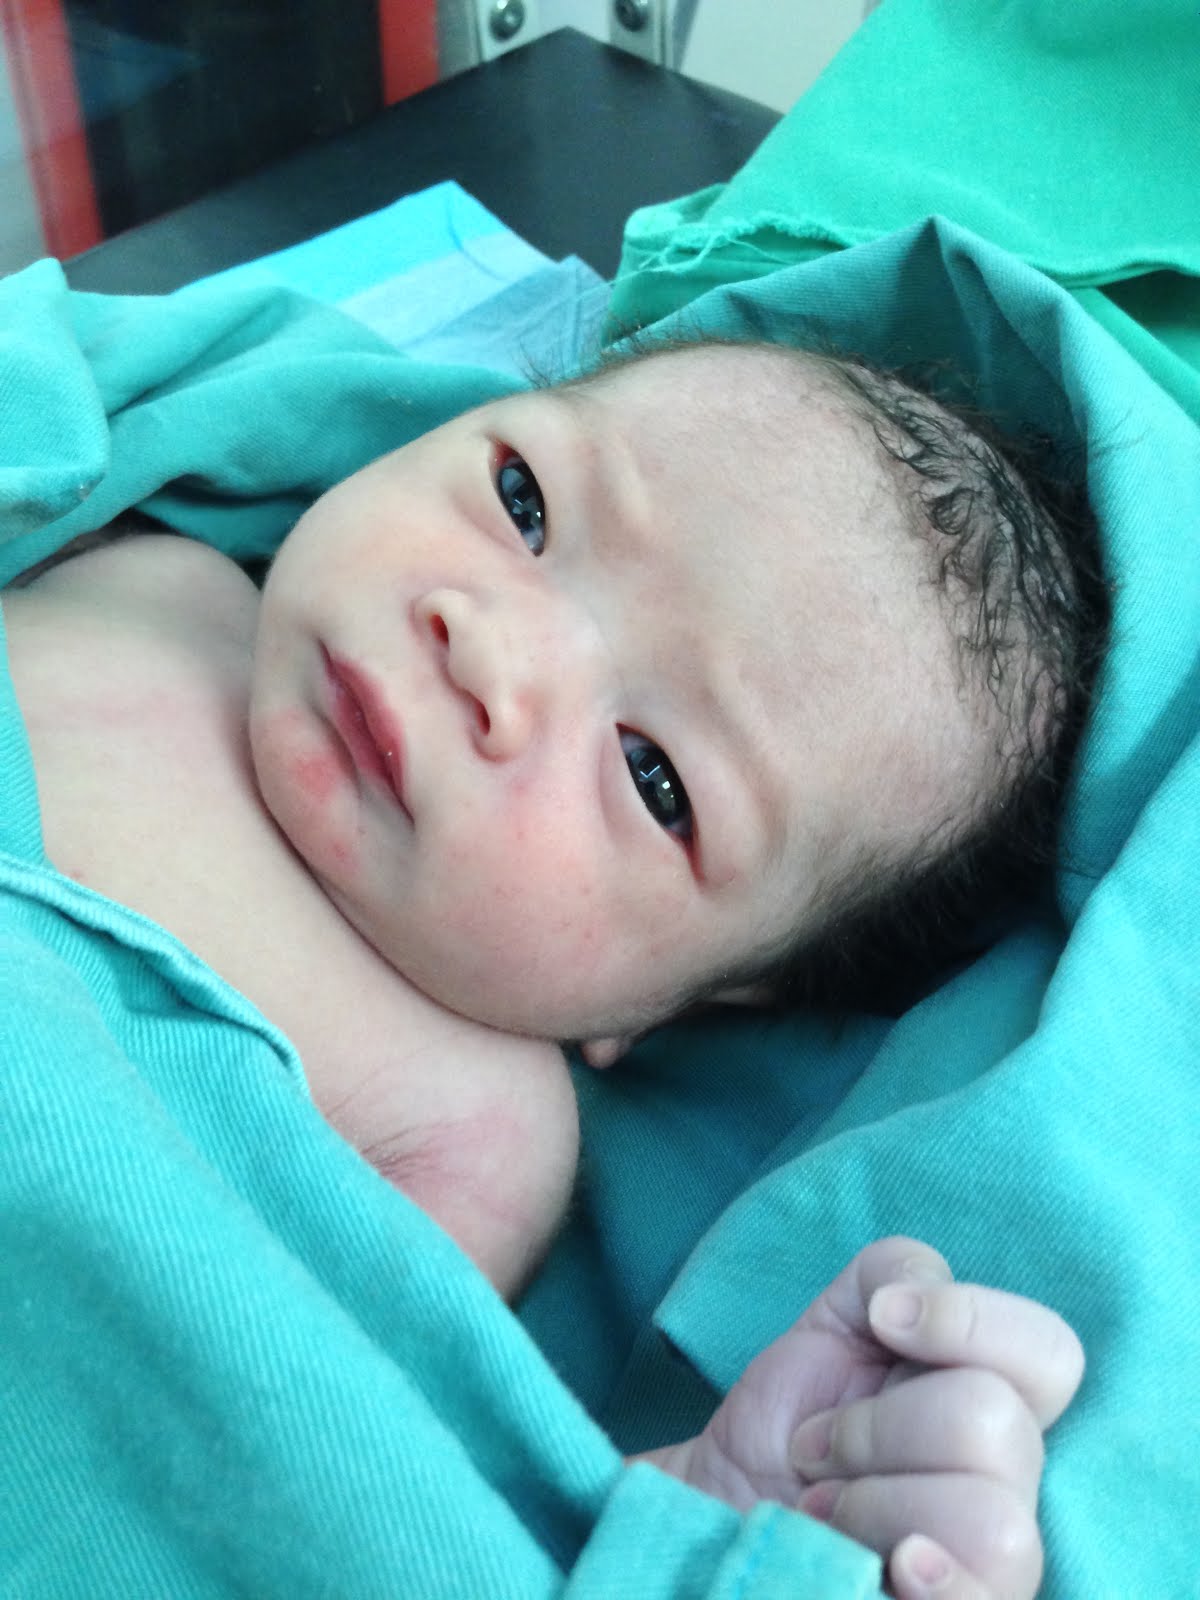 Affan Dhani 1st day mellhat dunia